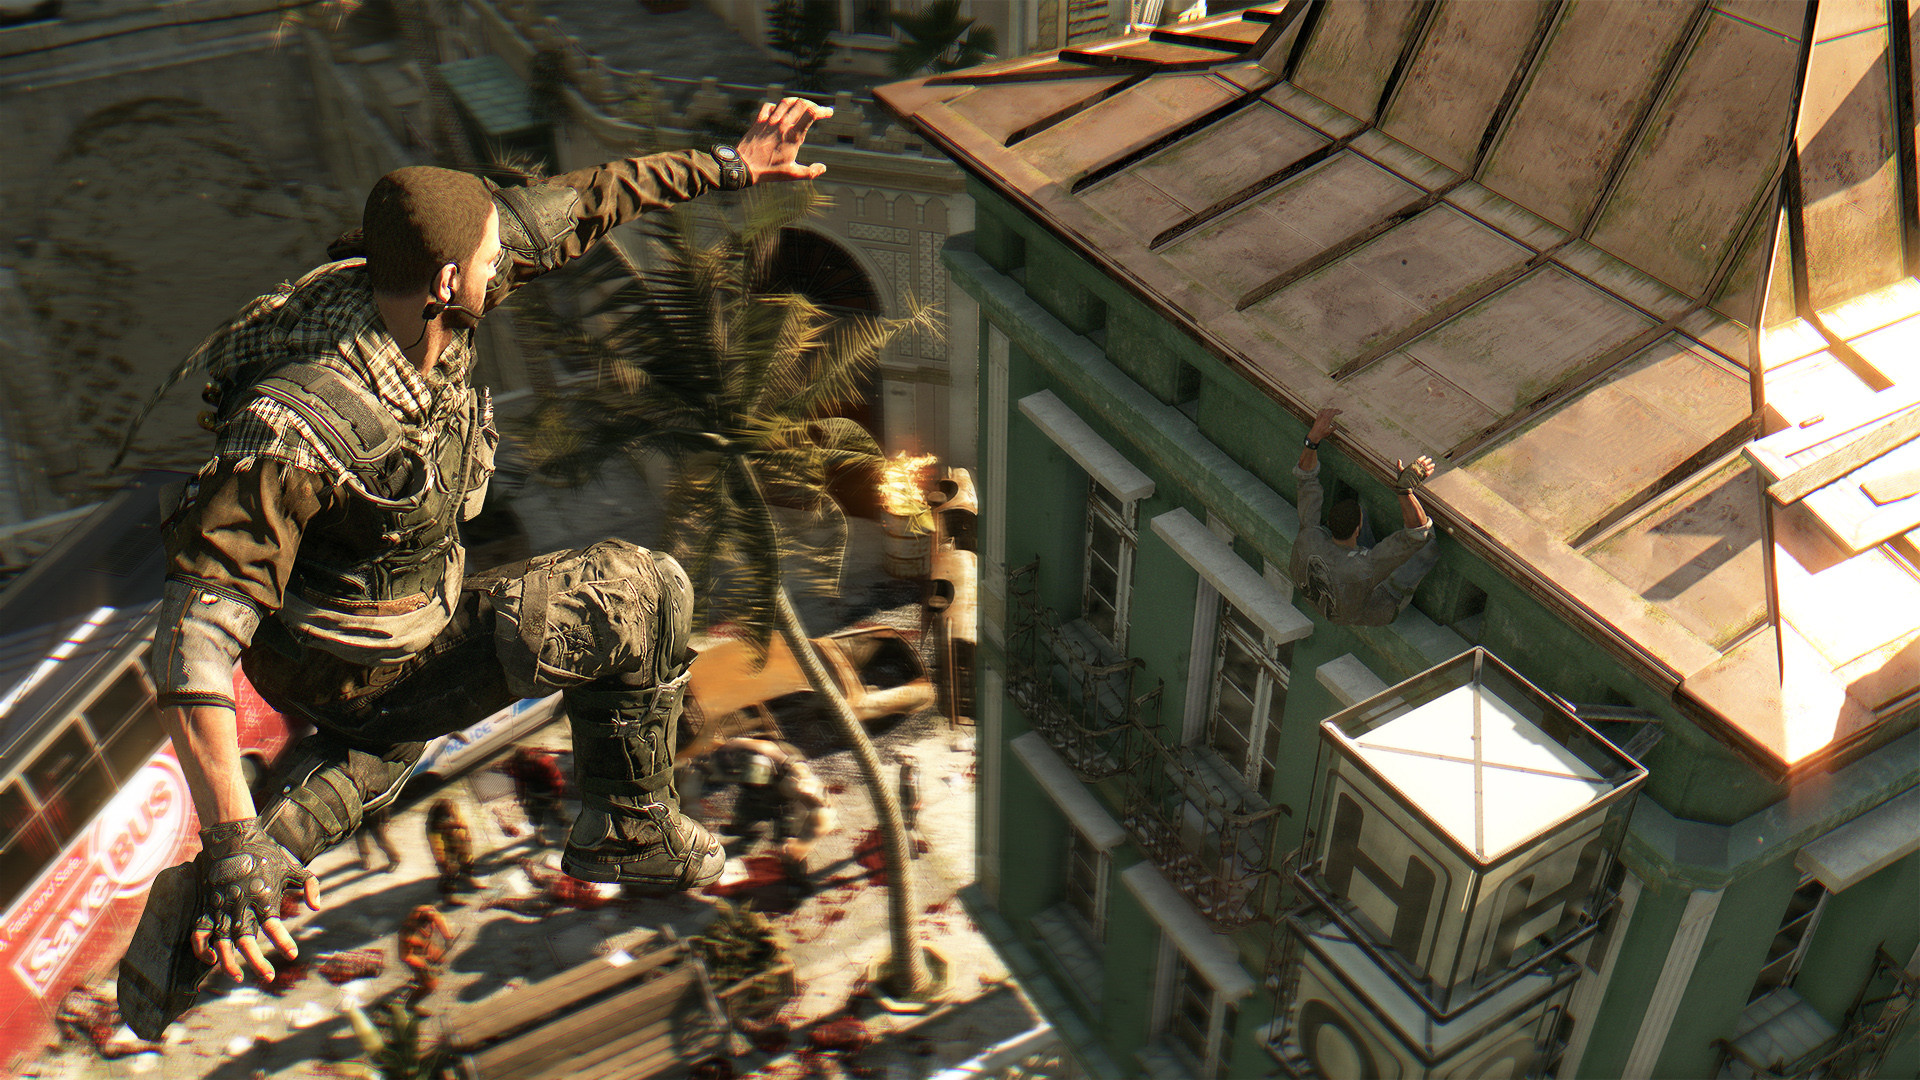 Dying Light: Definitive Edition PlayStation 5 Account